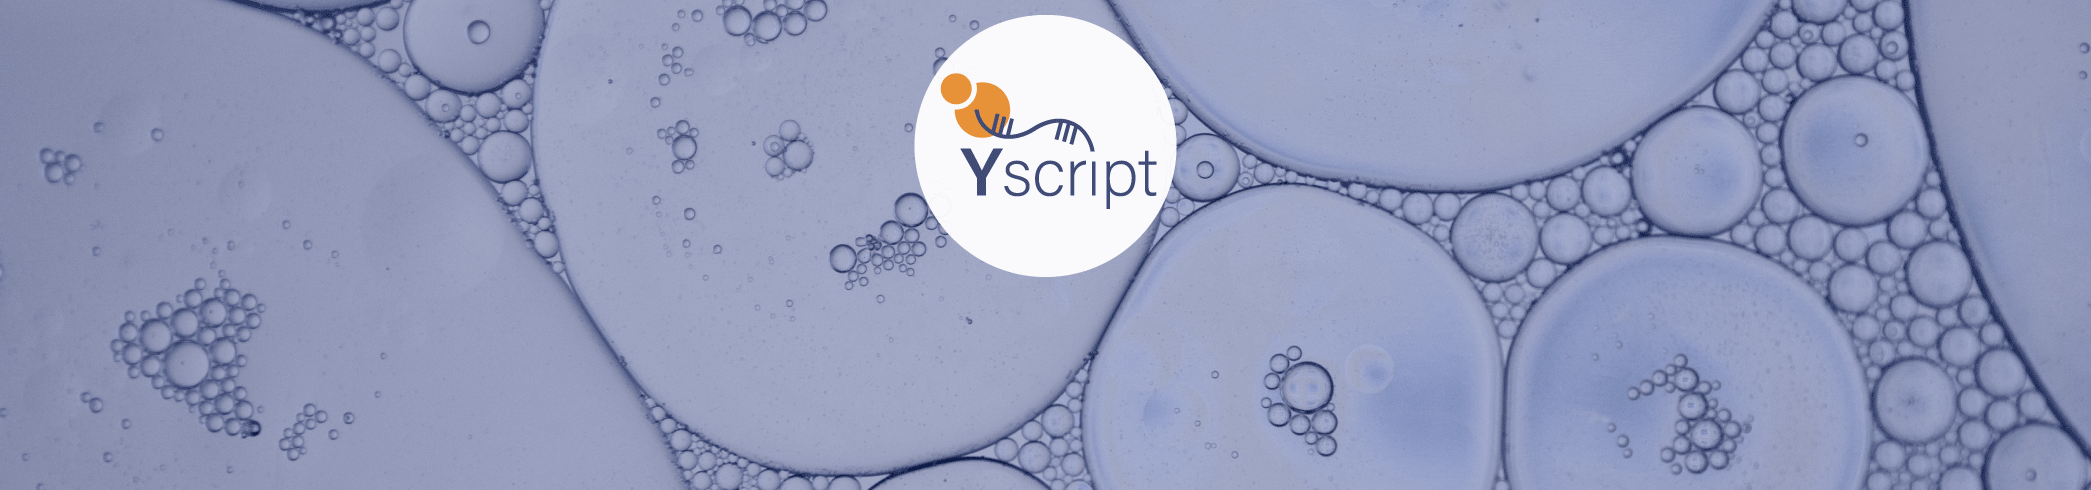 Engineering yeast for mRNA production: EURICE is partner of new European Innovation Council Pathfinder project Yscript